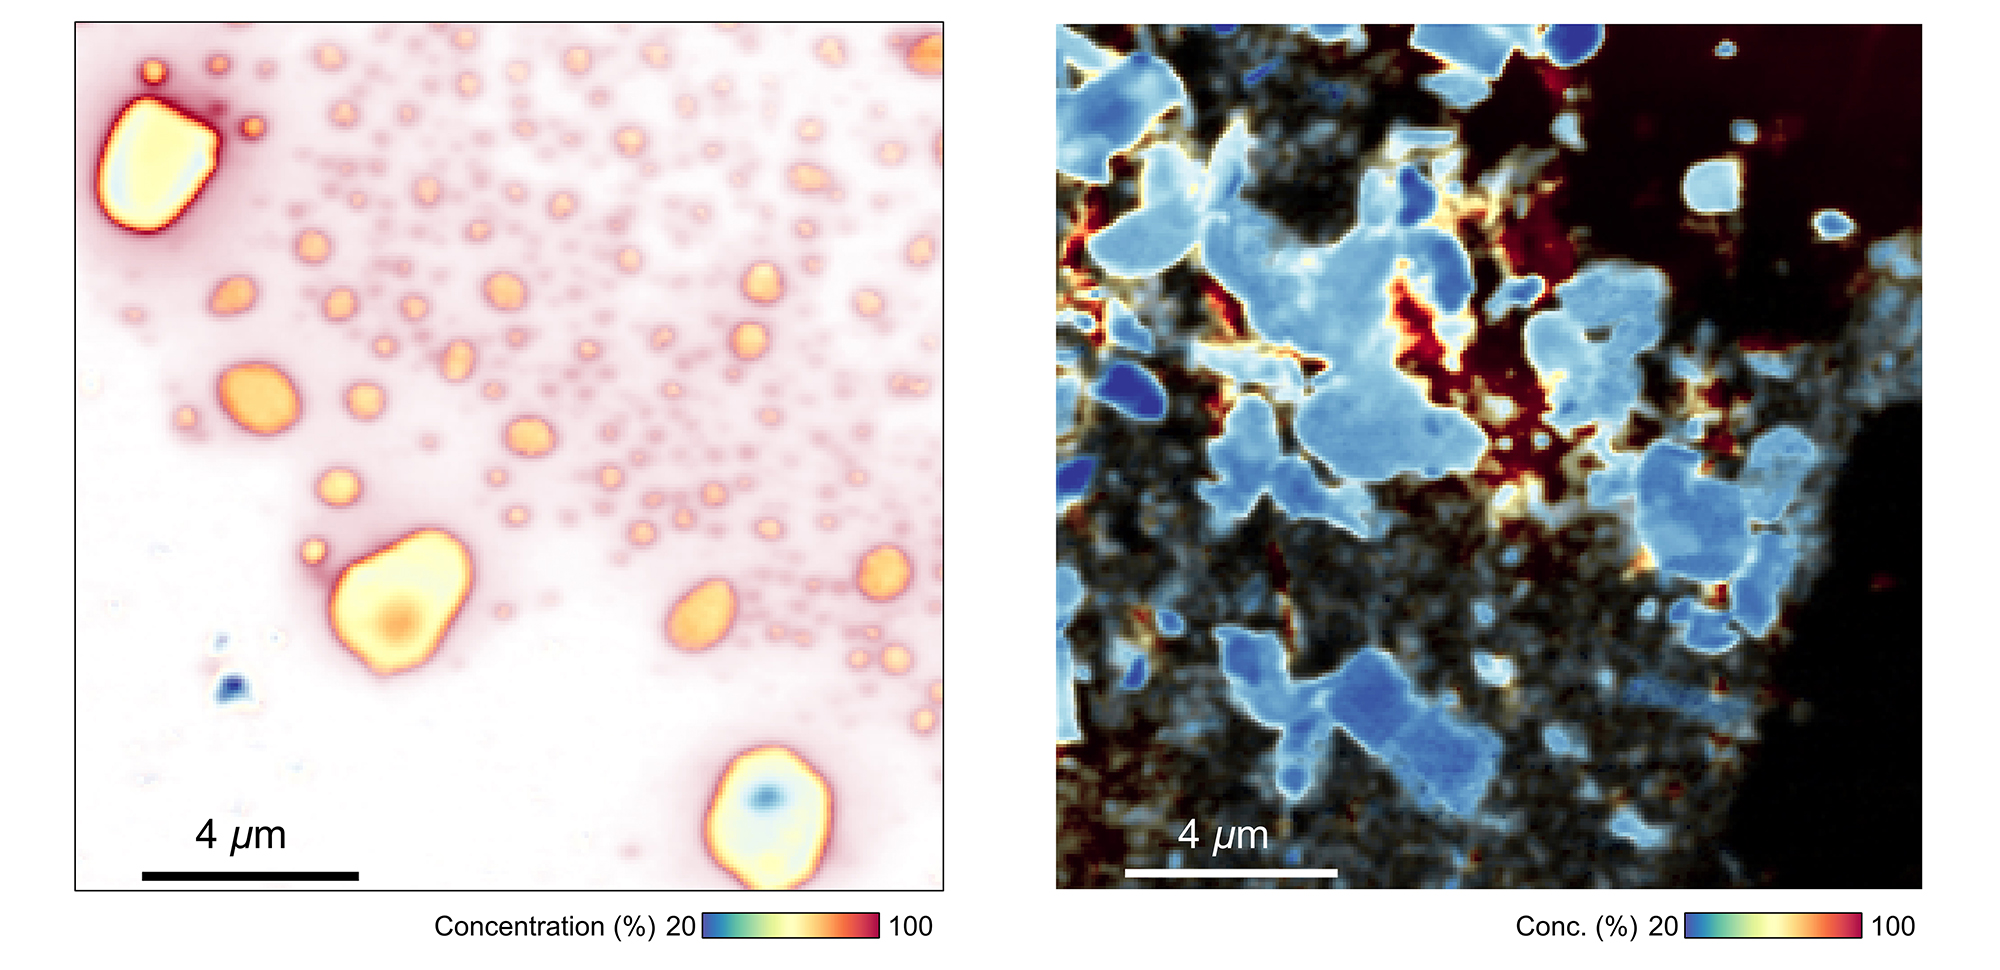 Left box shows high concentration at particle edges; right box shows low concentrations throughout.